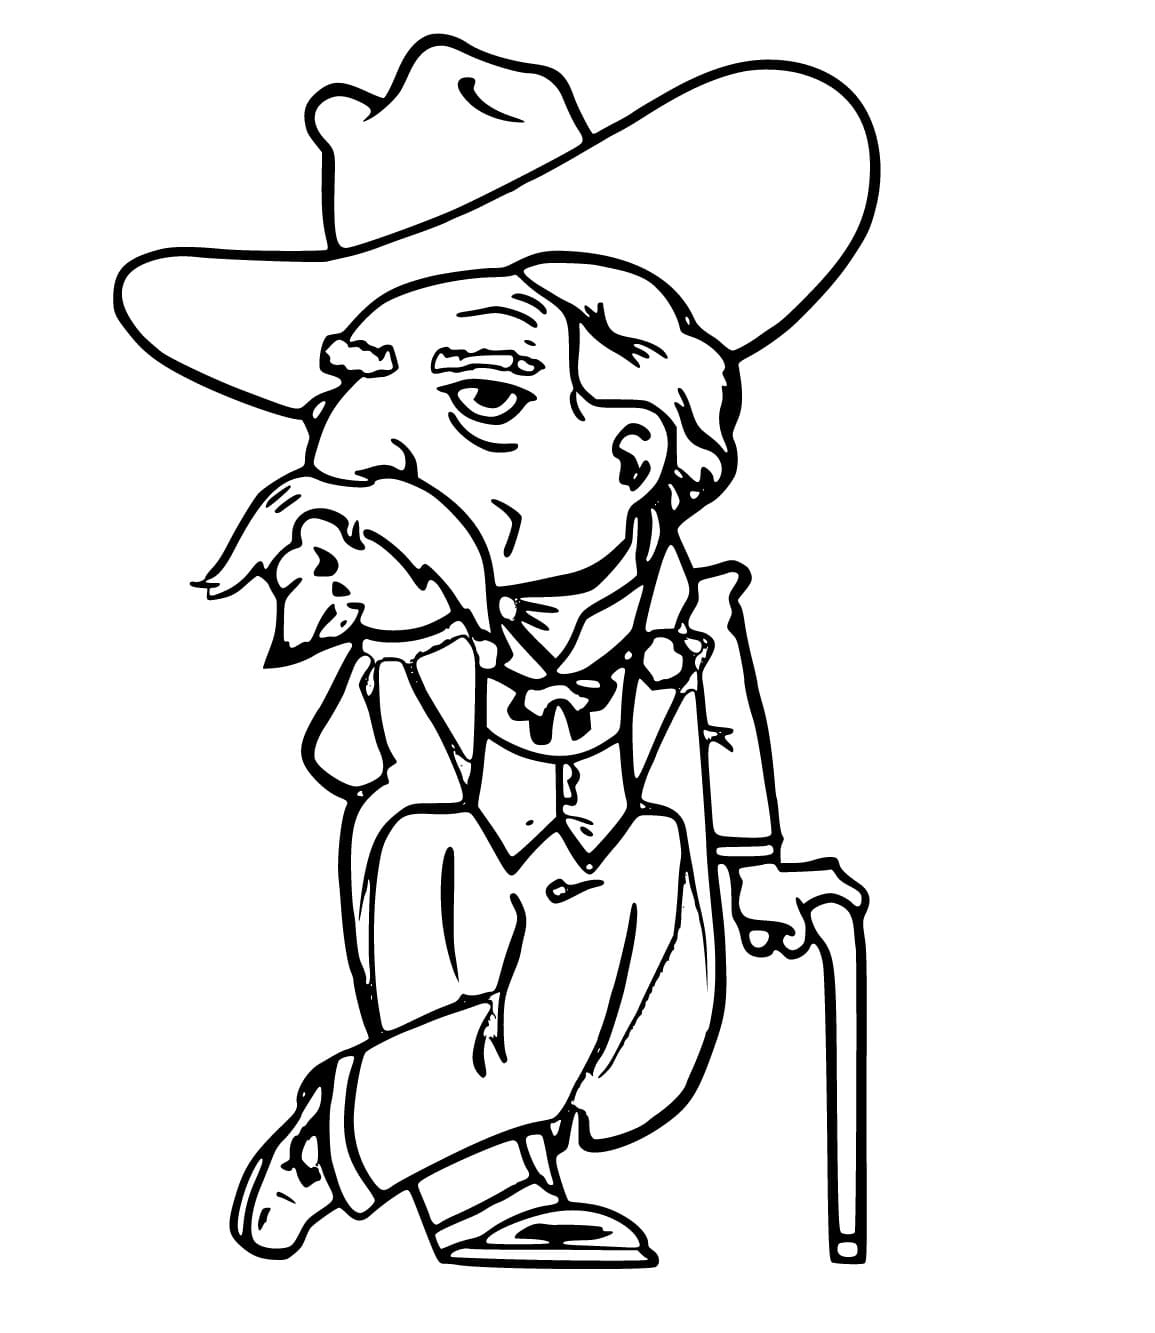 Colonel Reb Mascot coloring page - Download, Print or Color Online for Free